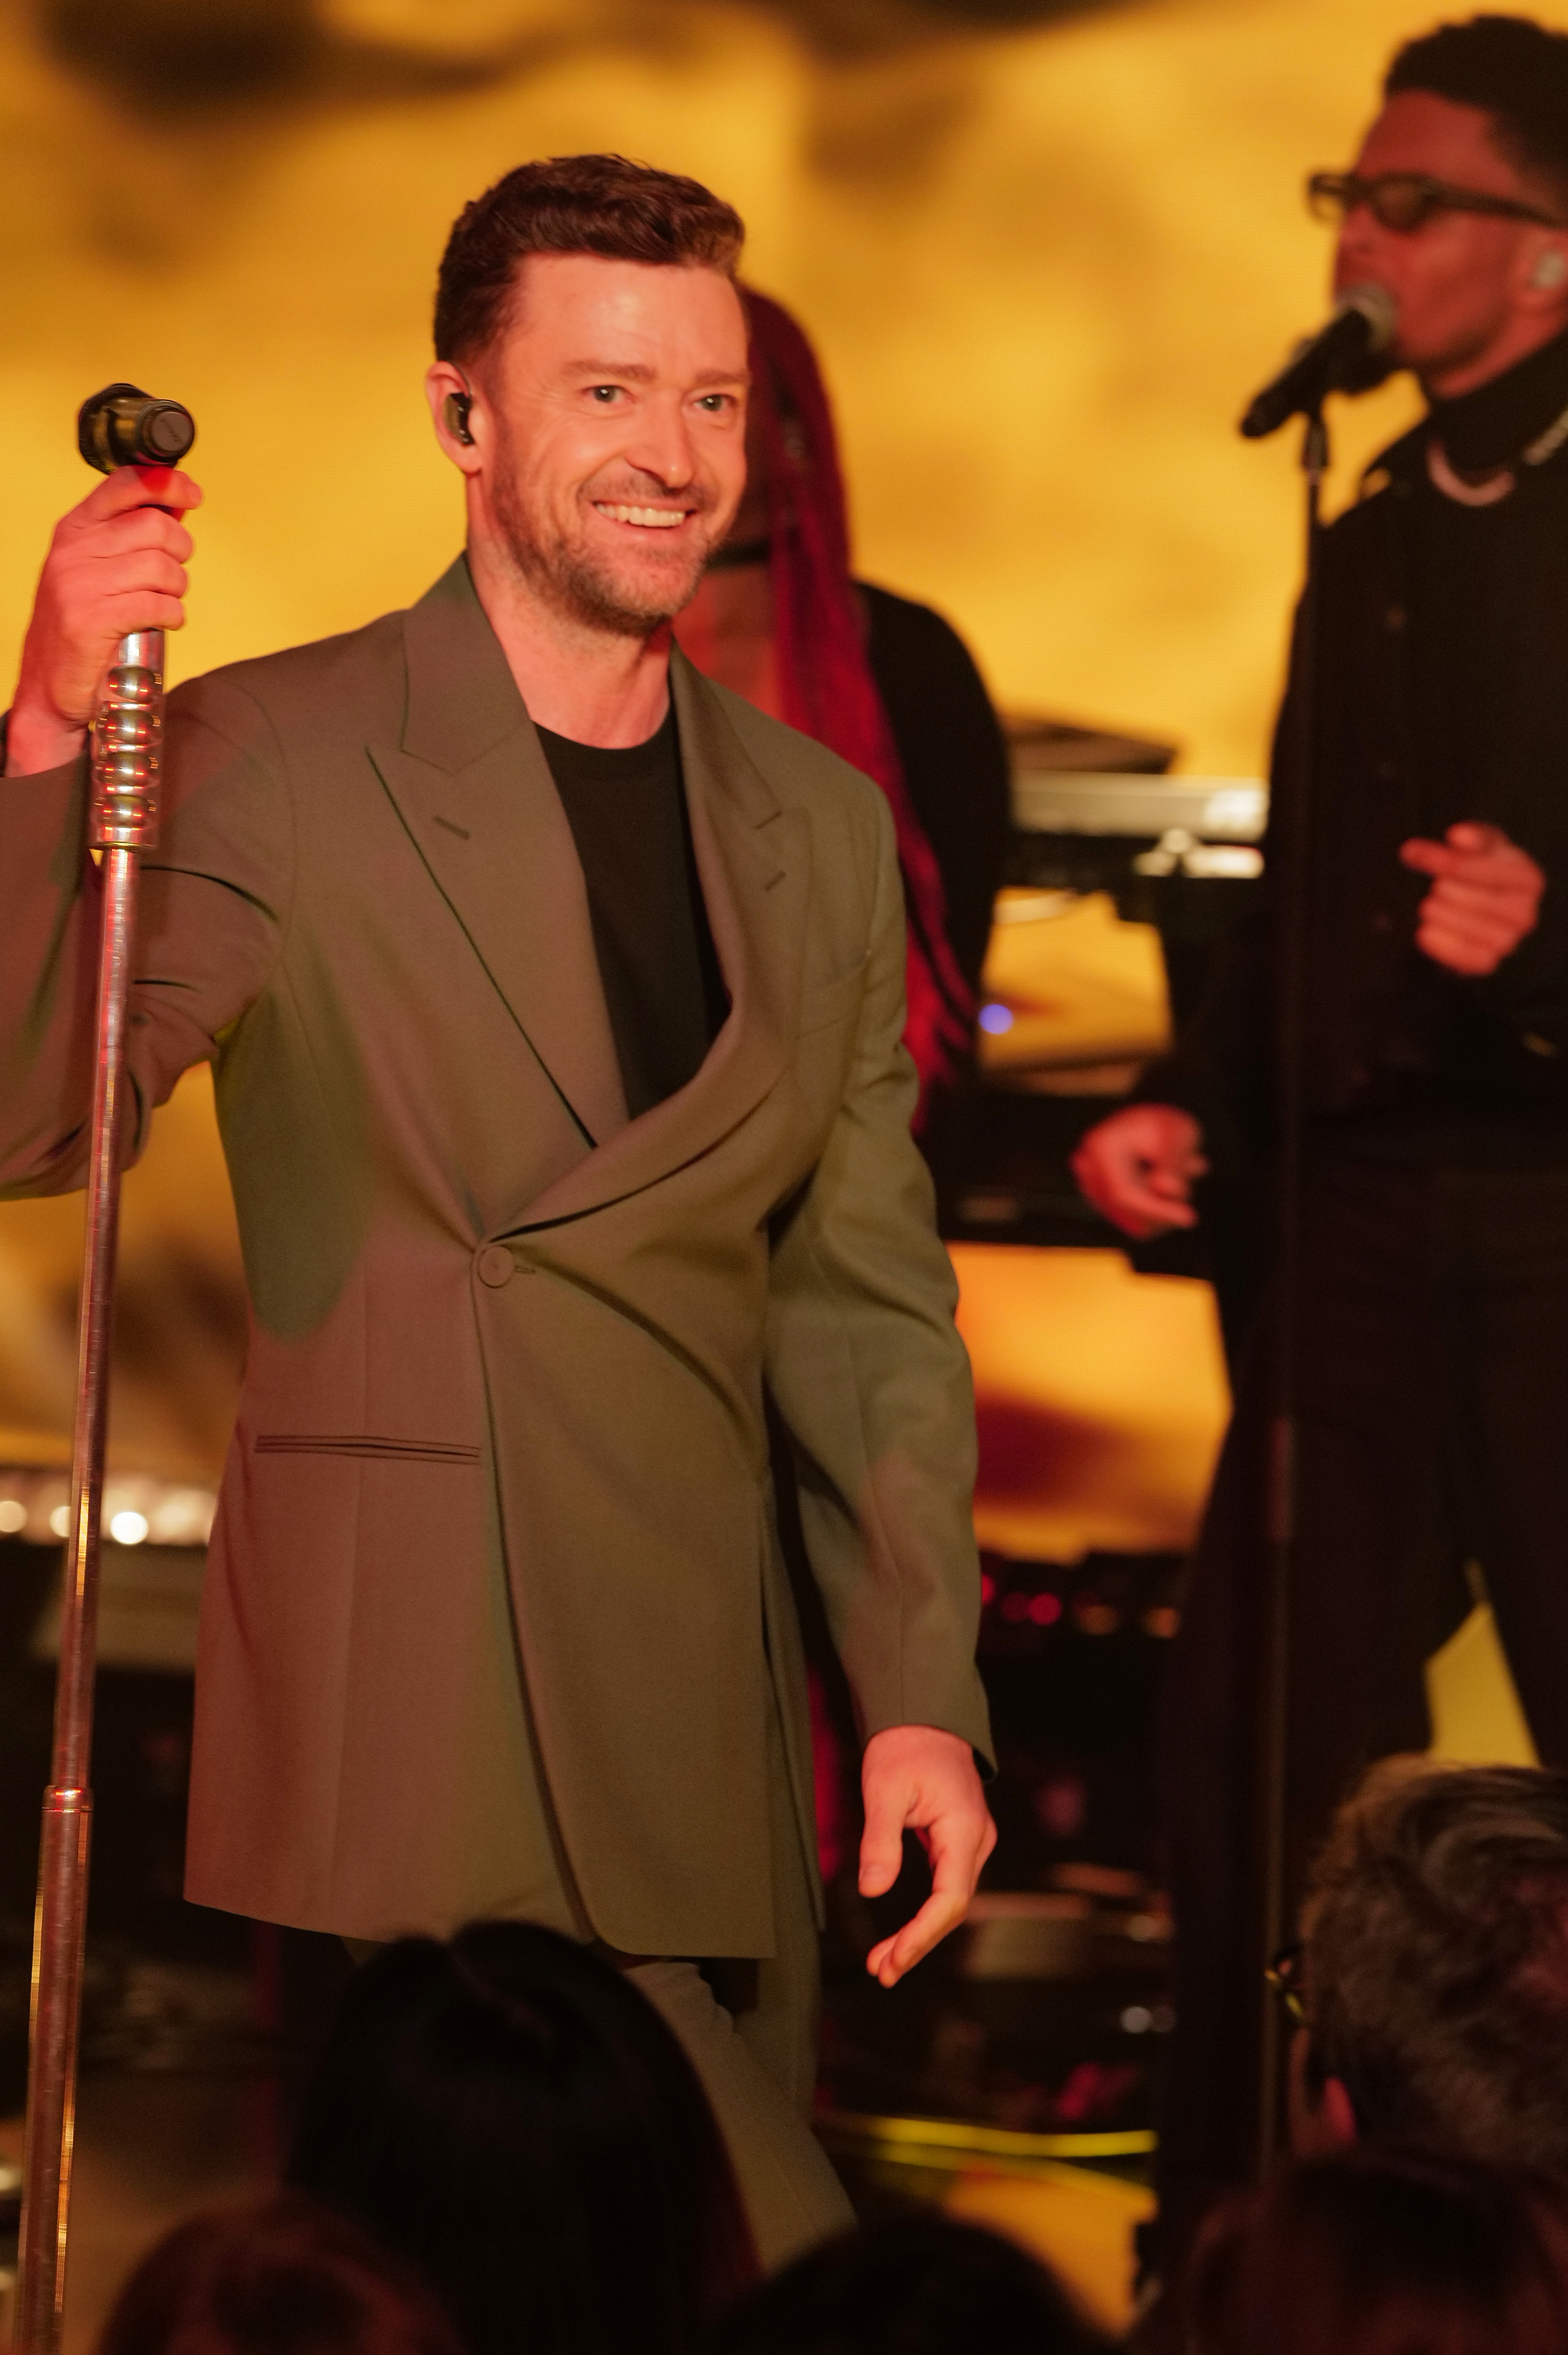 Justin Timberlake performs on stage wearing a green suit, holding a microphone. Background performers are visible in the scene